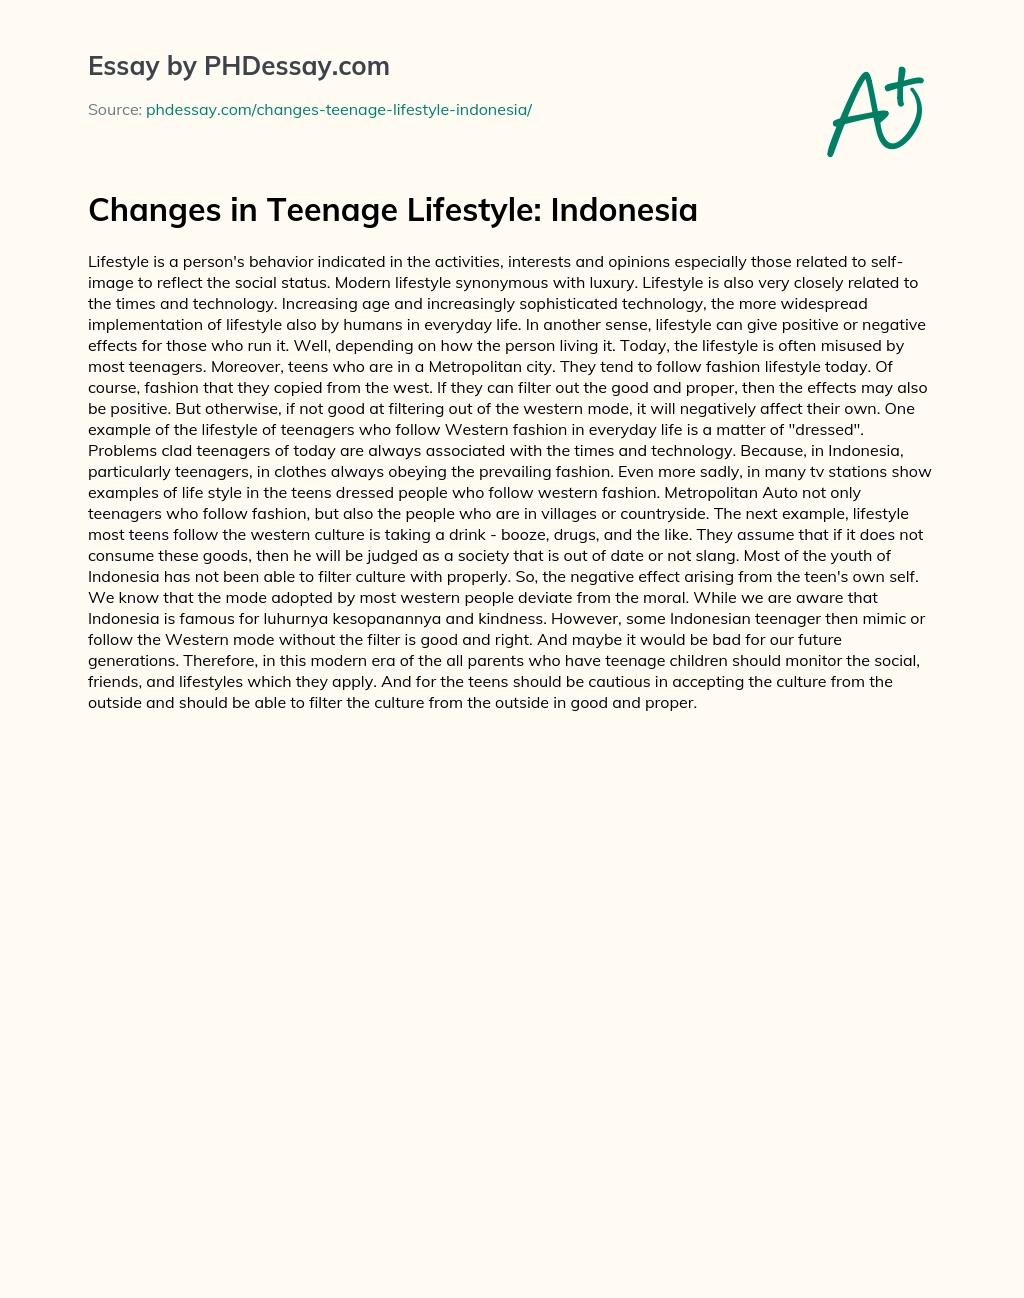 Changes in Teenage Lifestyle: Indonesia essay